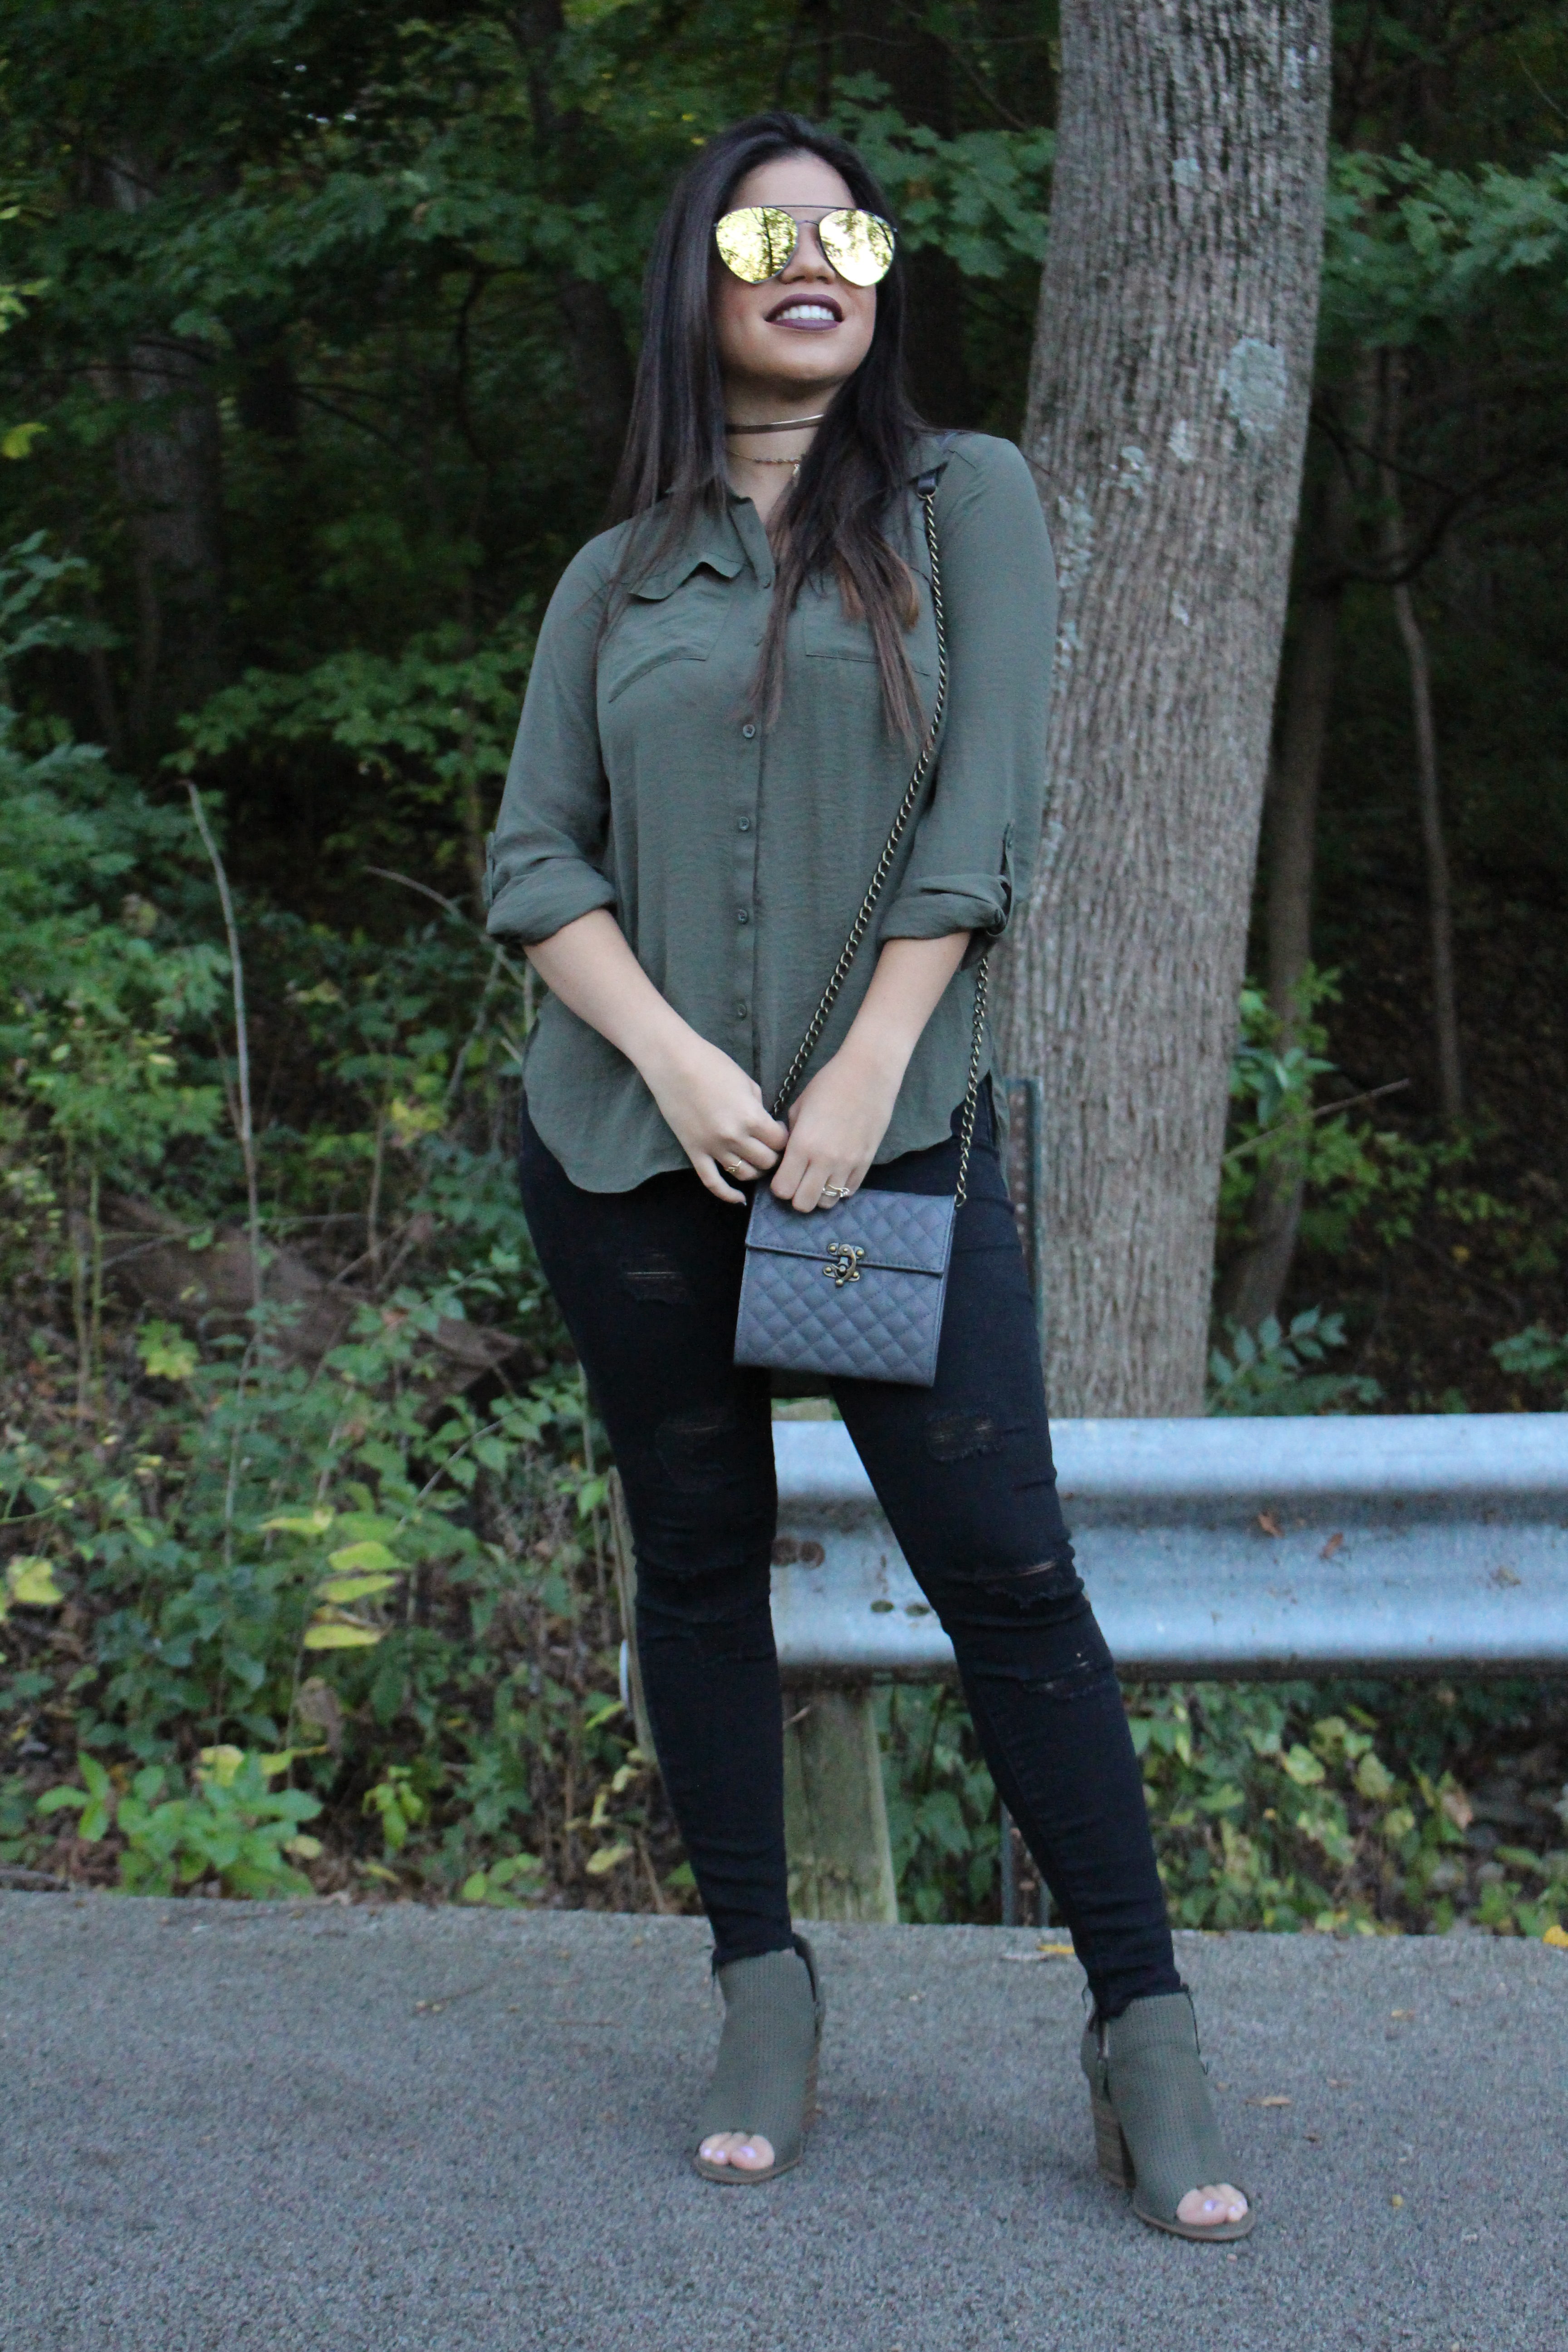 Olive Blouse old navy rockstar jeans steve madden bag fall outfit charlotte russe olive booties quay australia shades outfit idea OOTN by Alejandra Avila TuFashionPetite